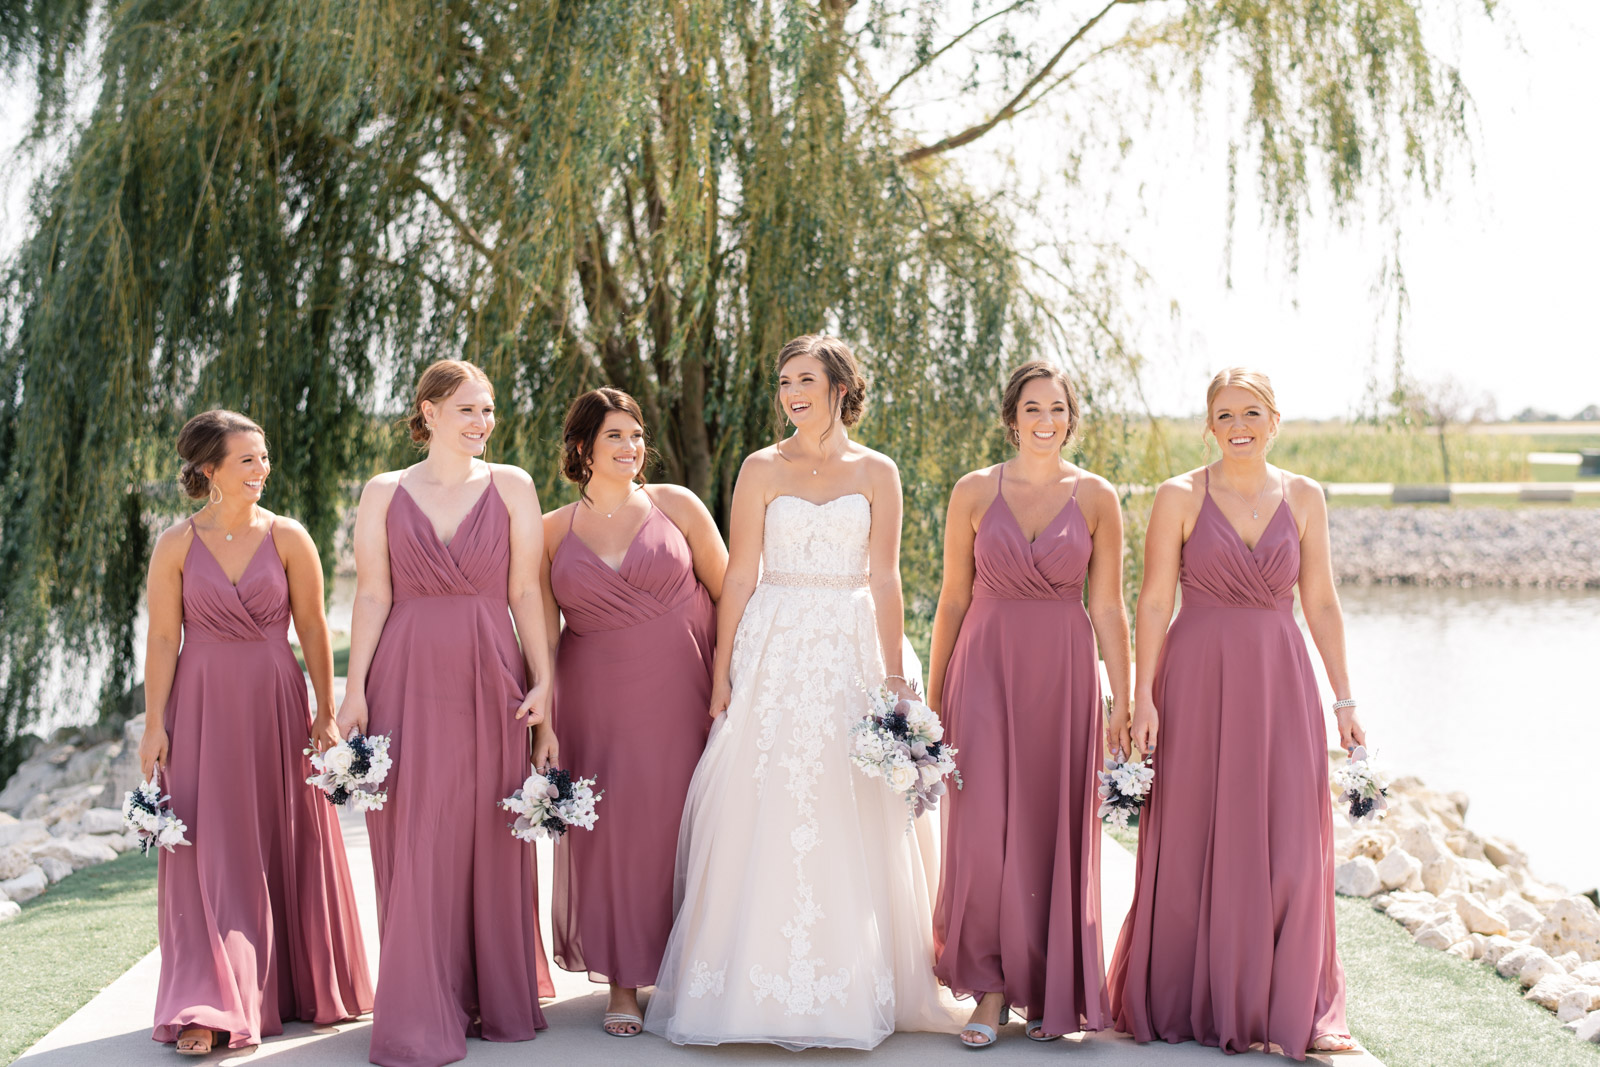 bridesmaids in purple dresses by willow tree epic event center wedding venue